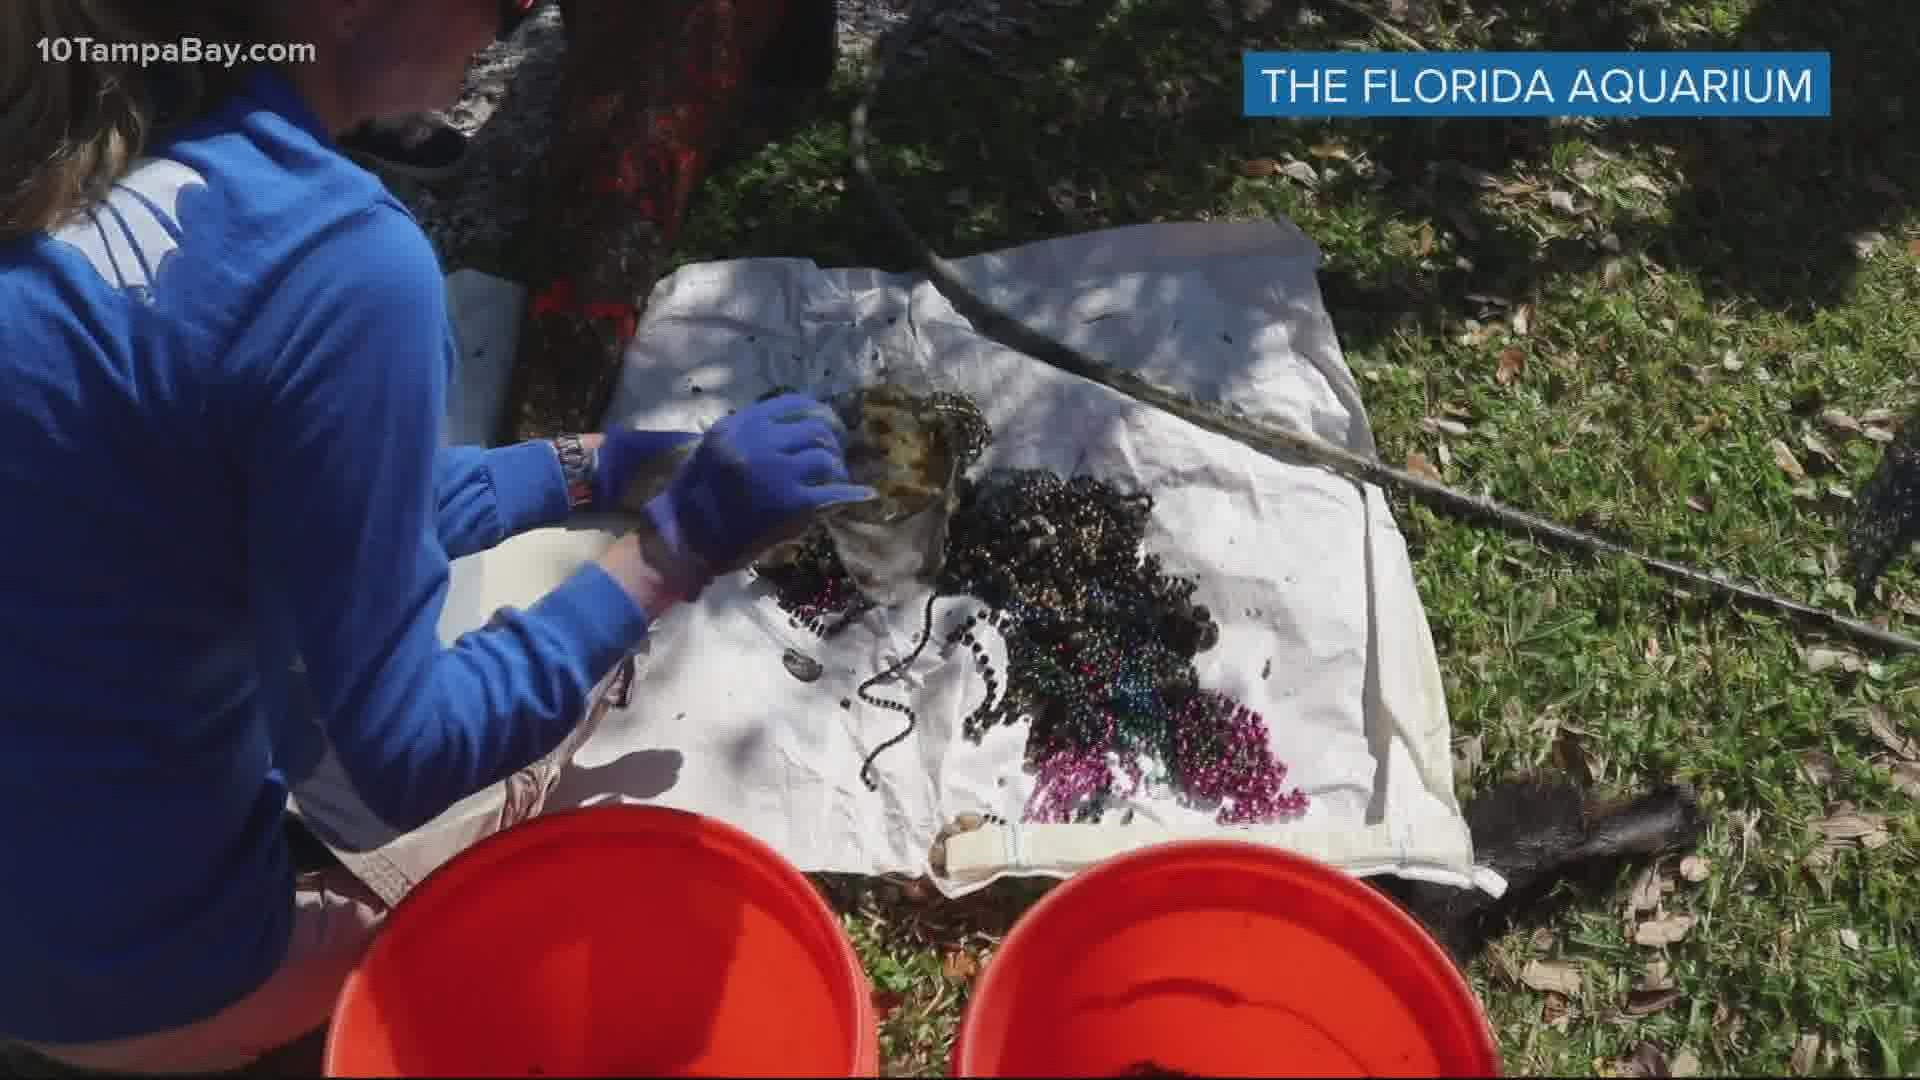 A total of 7.65 pounds of beads were fished out during the cleanup from Seddon Channel.